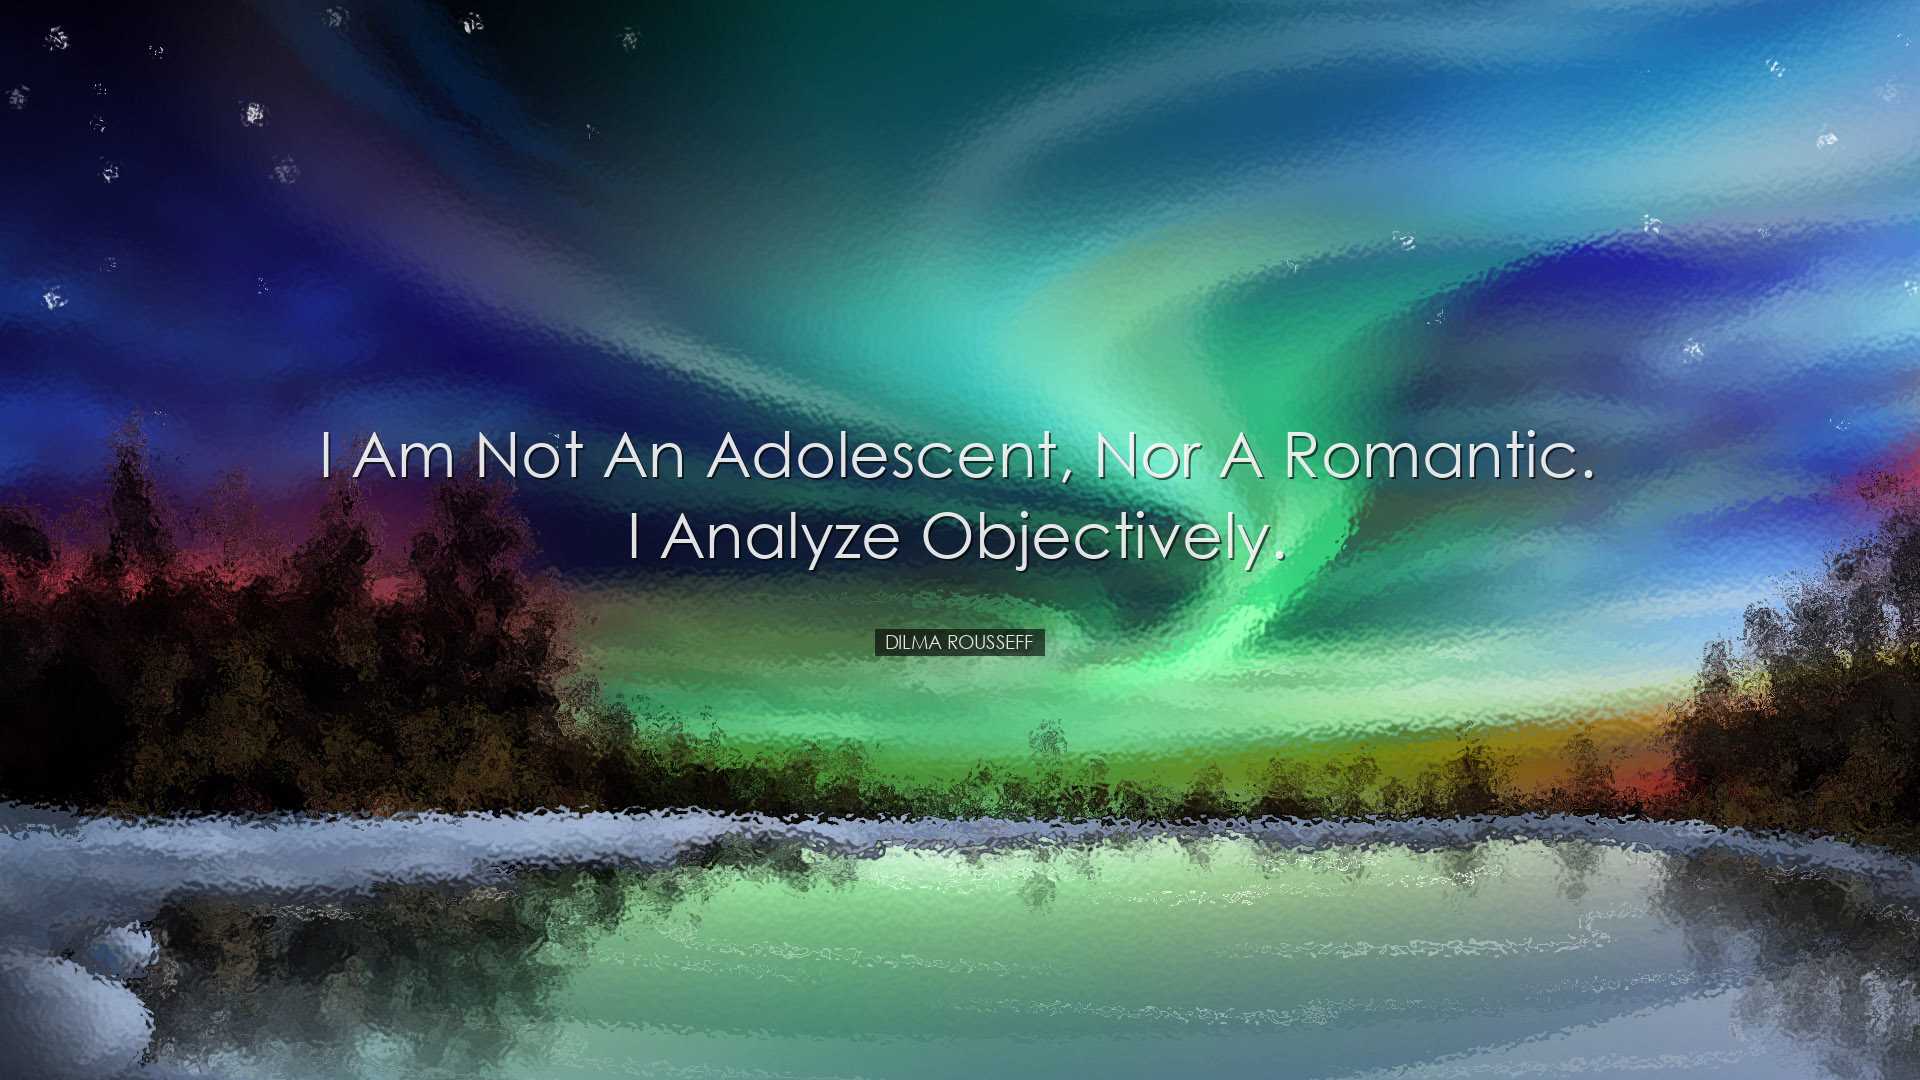 I am not an adolescent, nor a romantic. I analyze objectively. - D